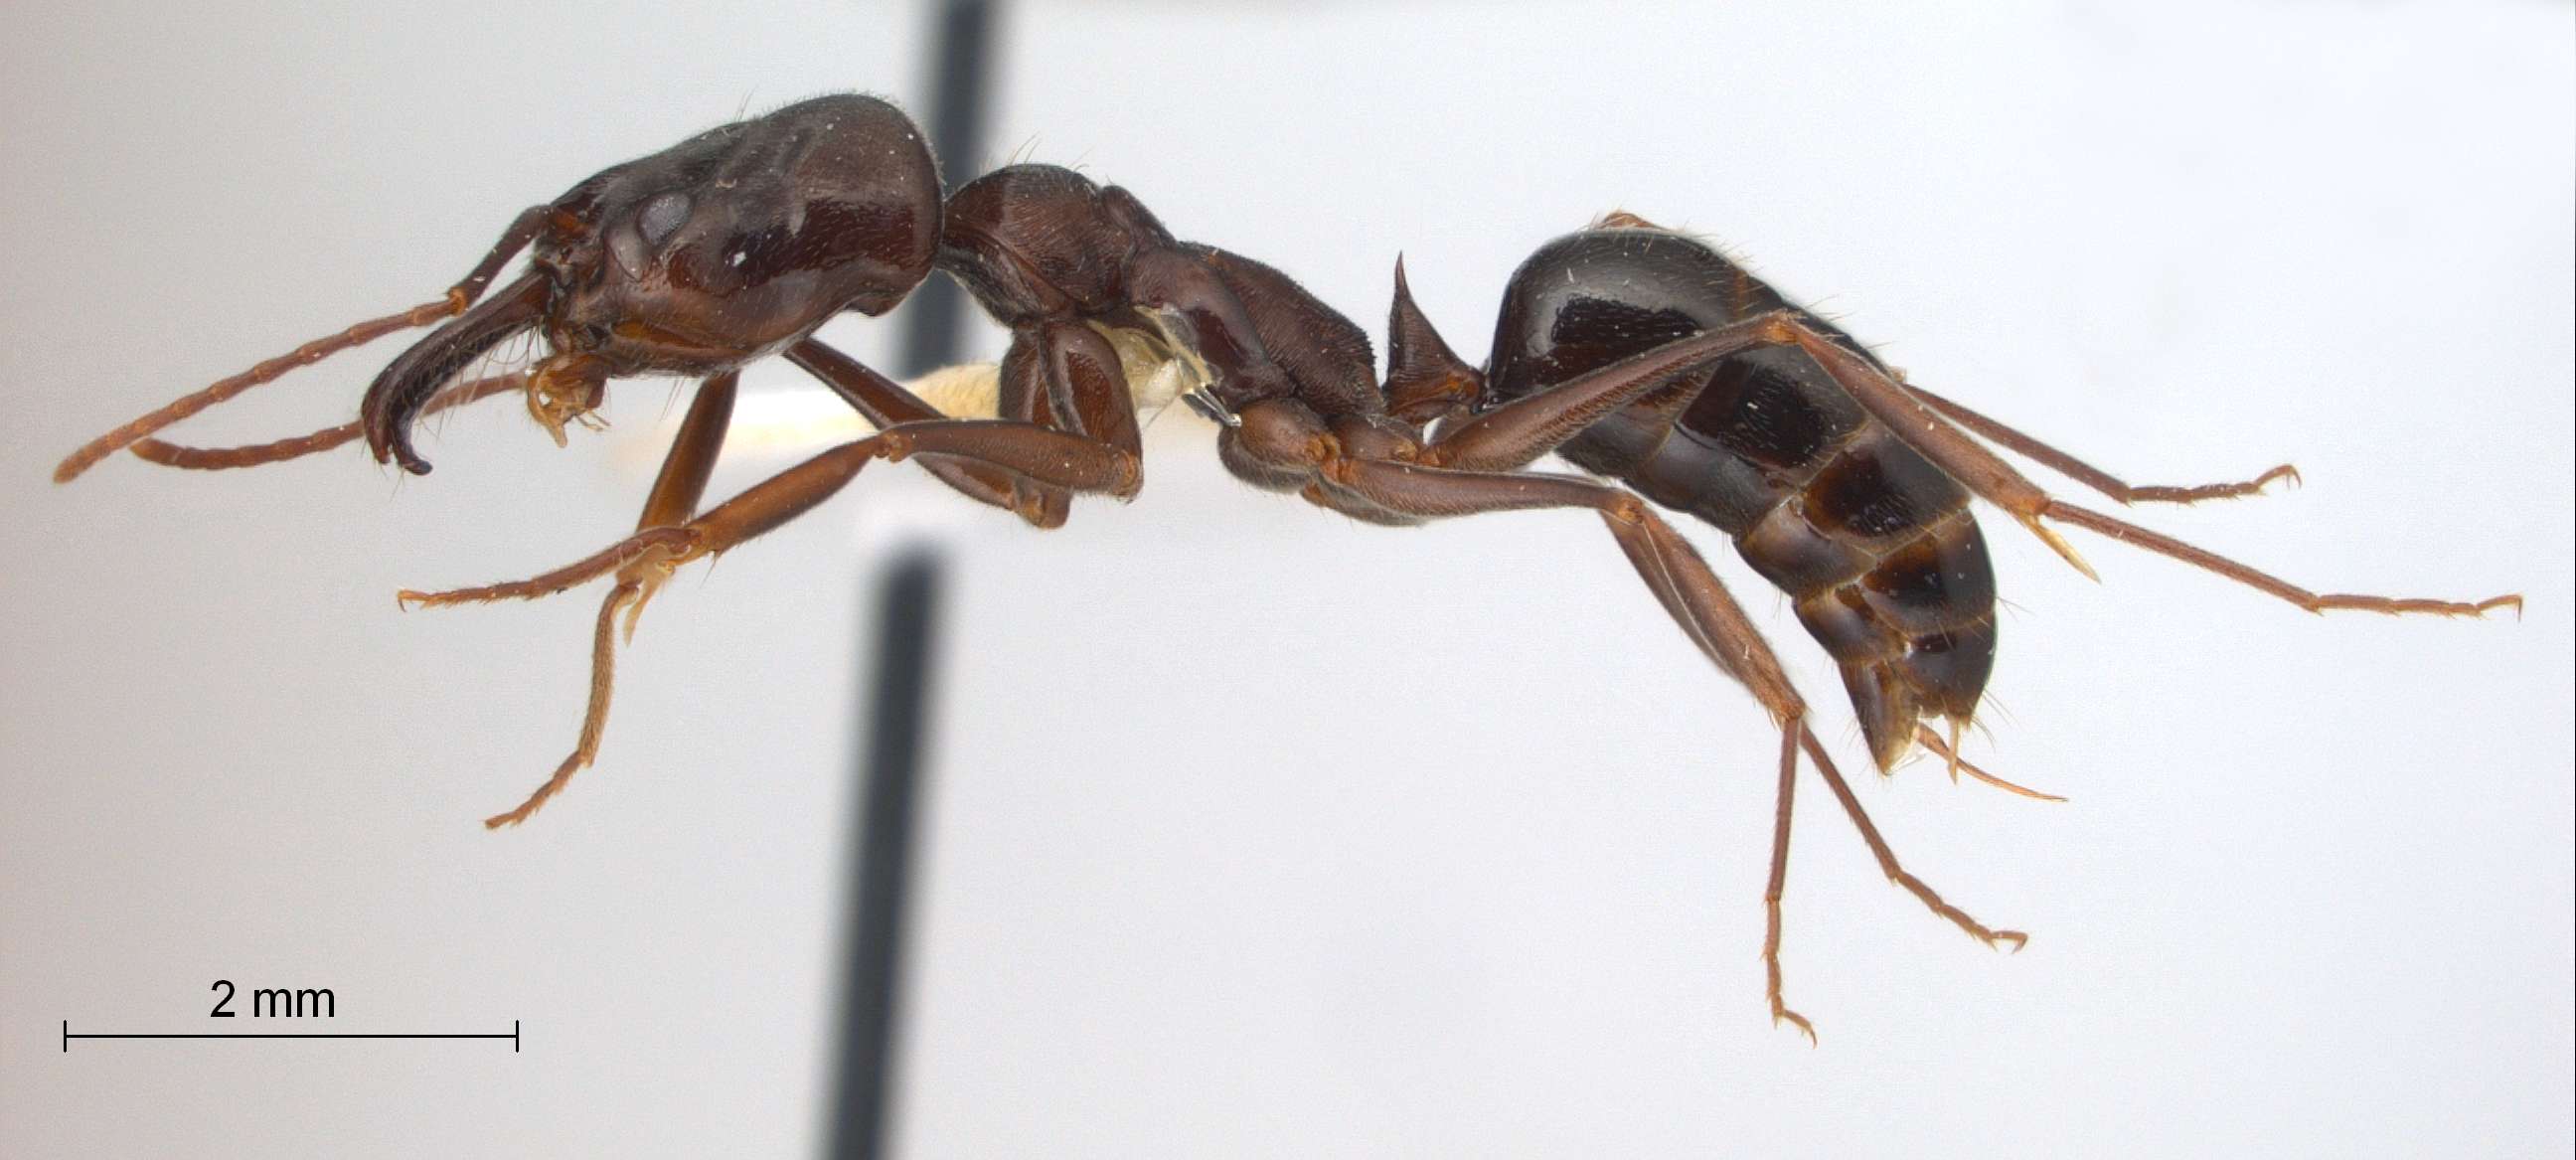 Odontomachus simillimus lateral